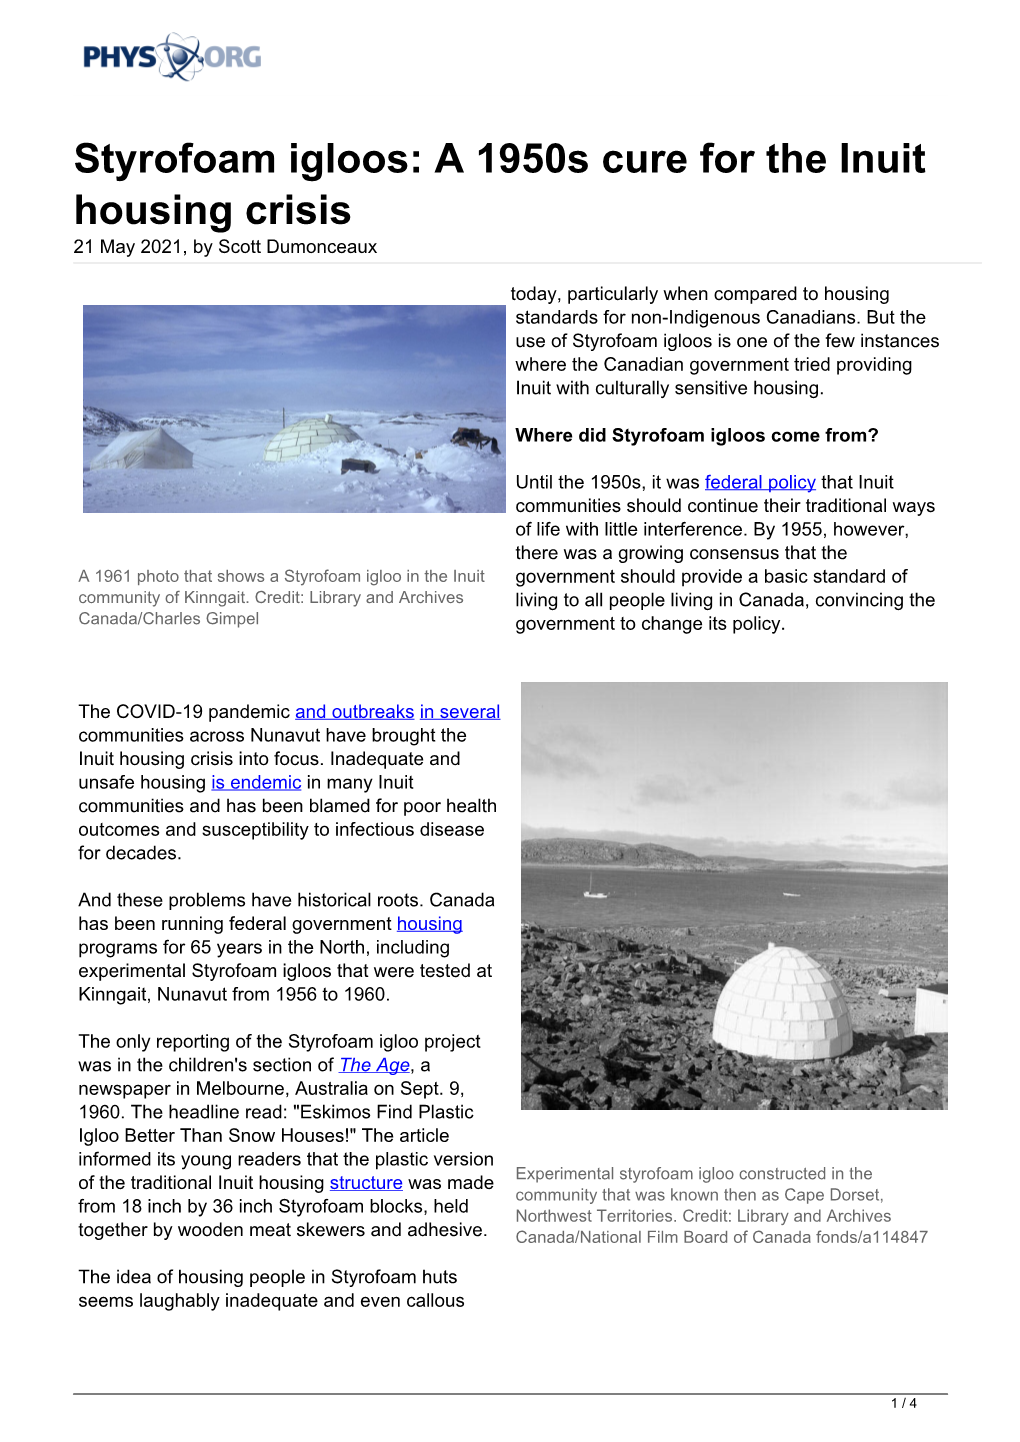 A 1950S Cure for the Inuit Housing Crisis 21 May 2021, by Scott Dumonceaux